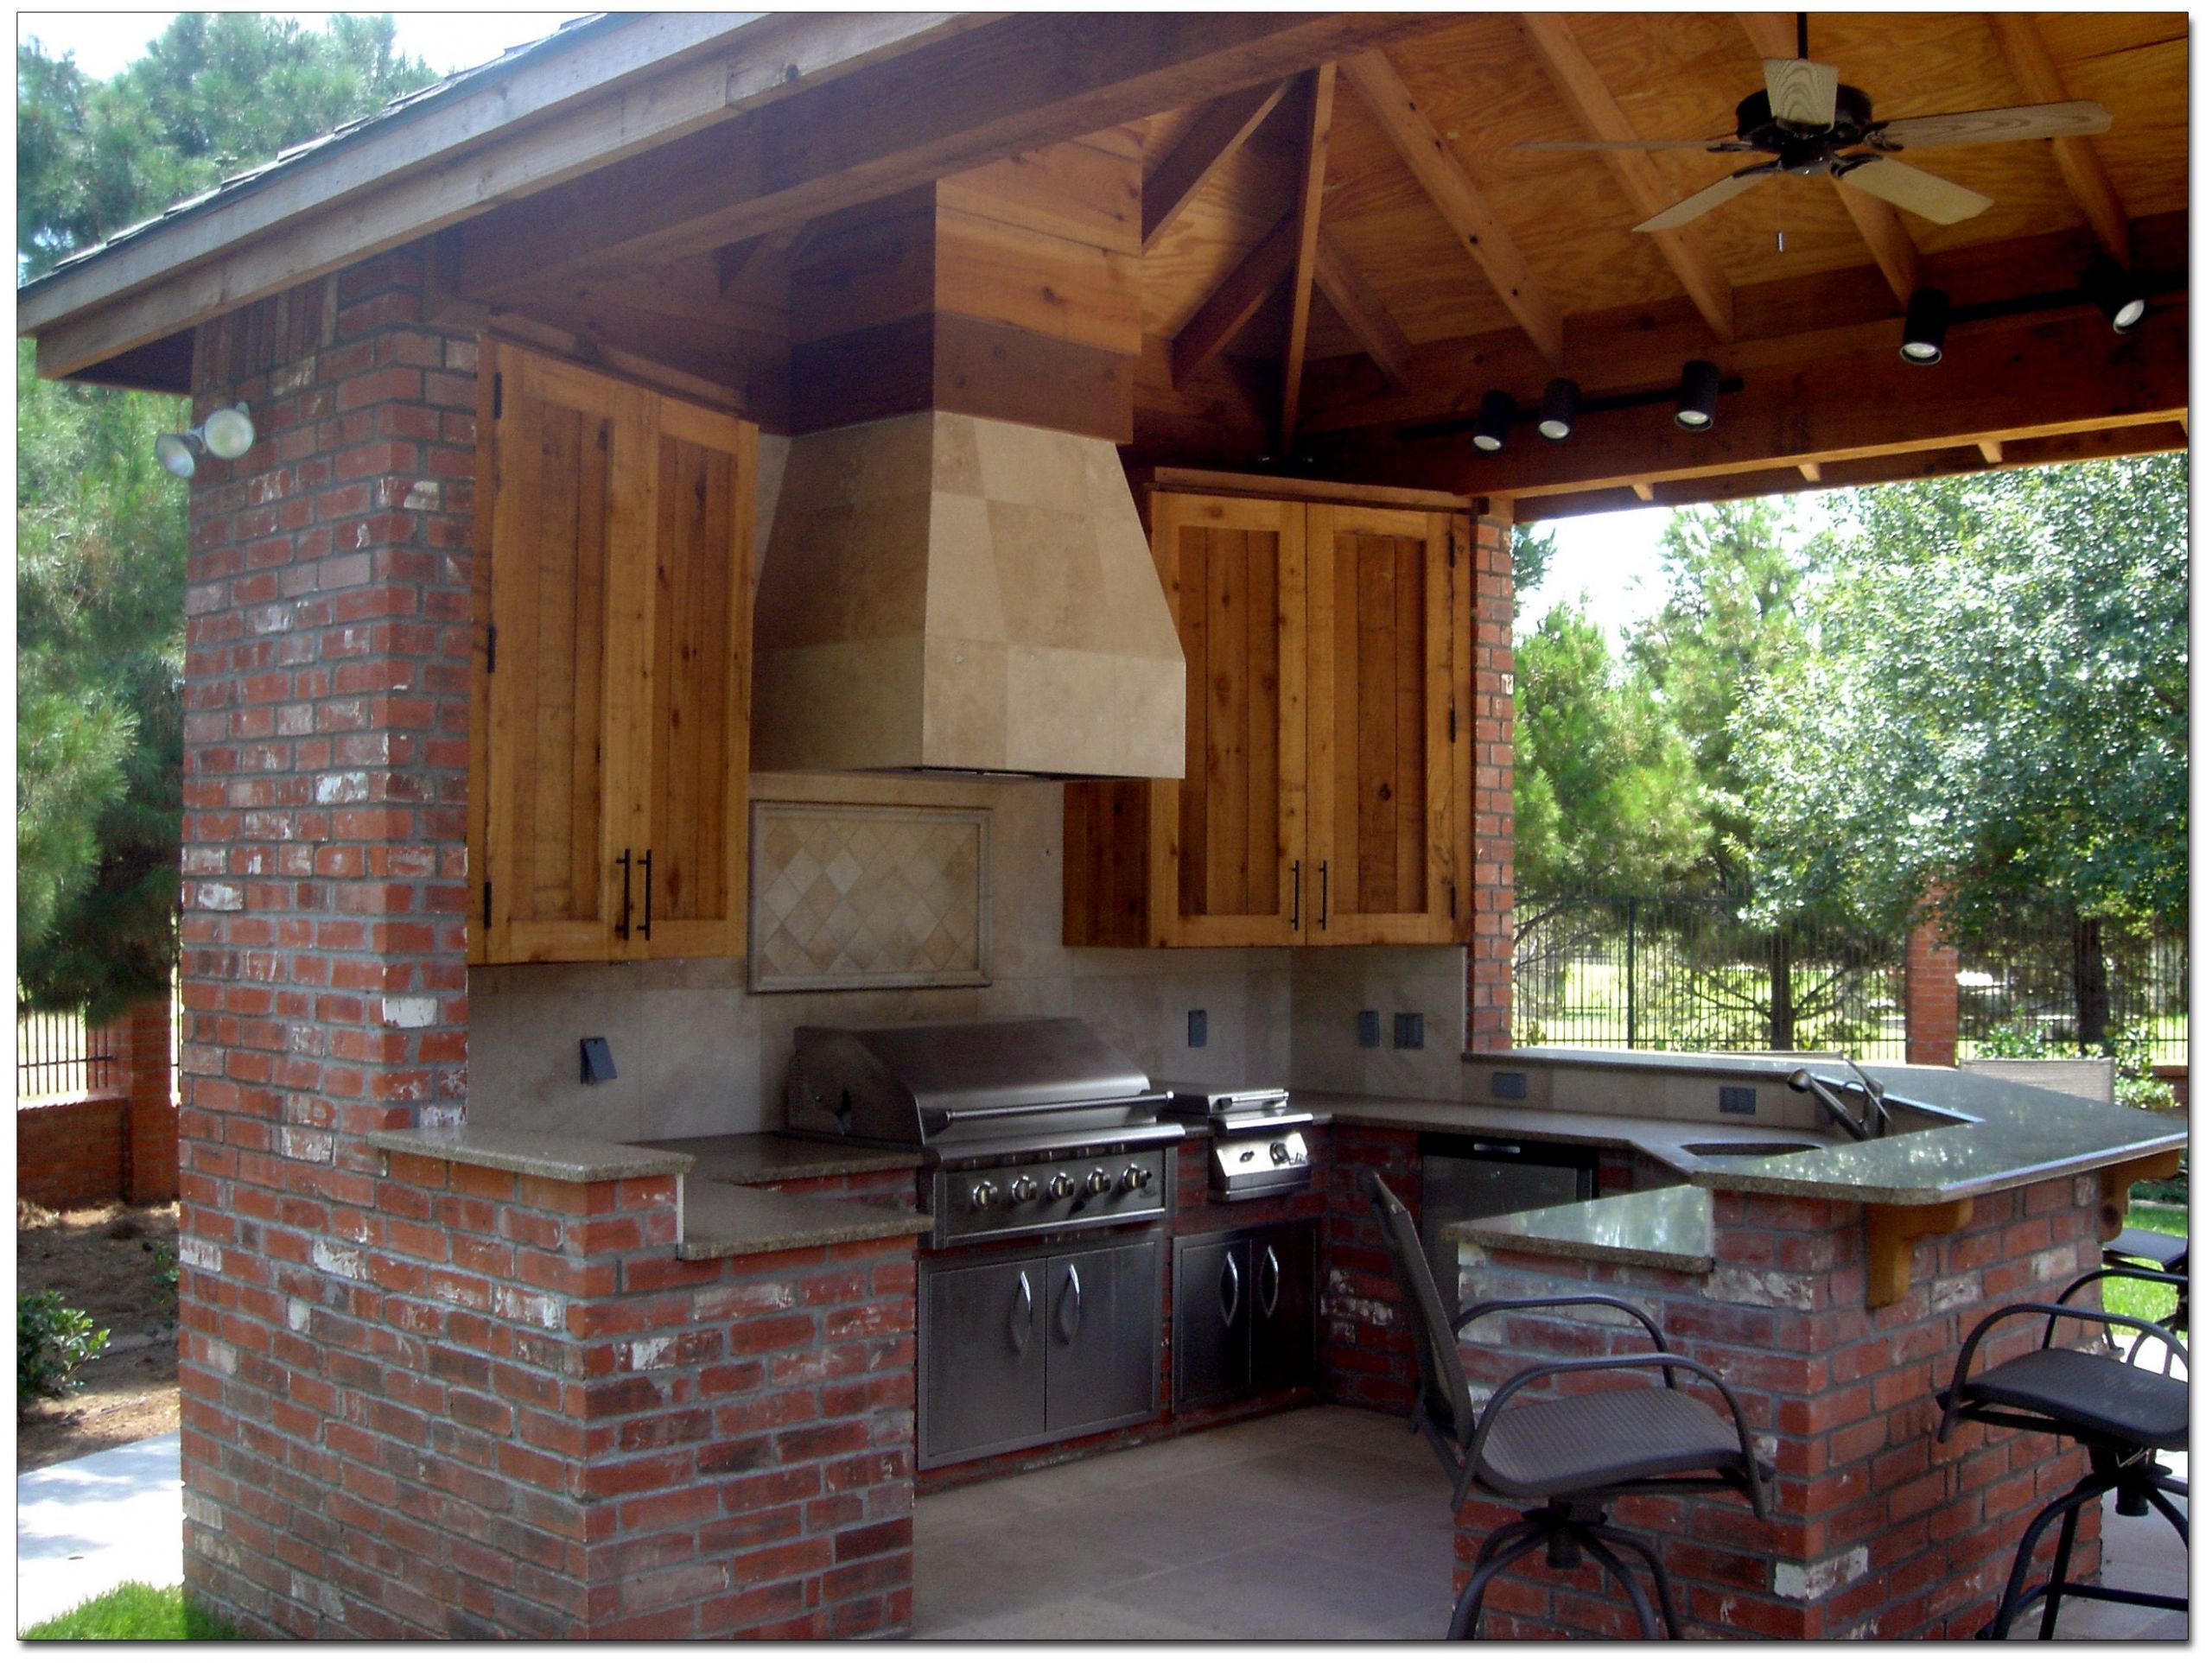 Outdoor Kitchen Cabinet Plans
 What if the tv s were in the cabinets That way they would